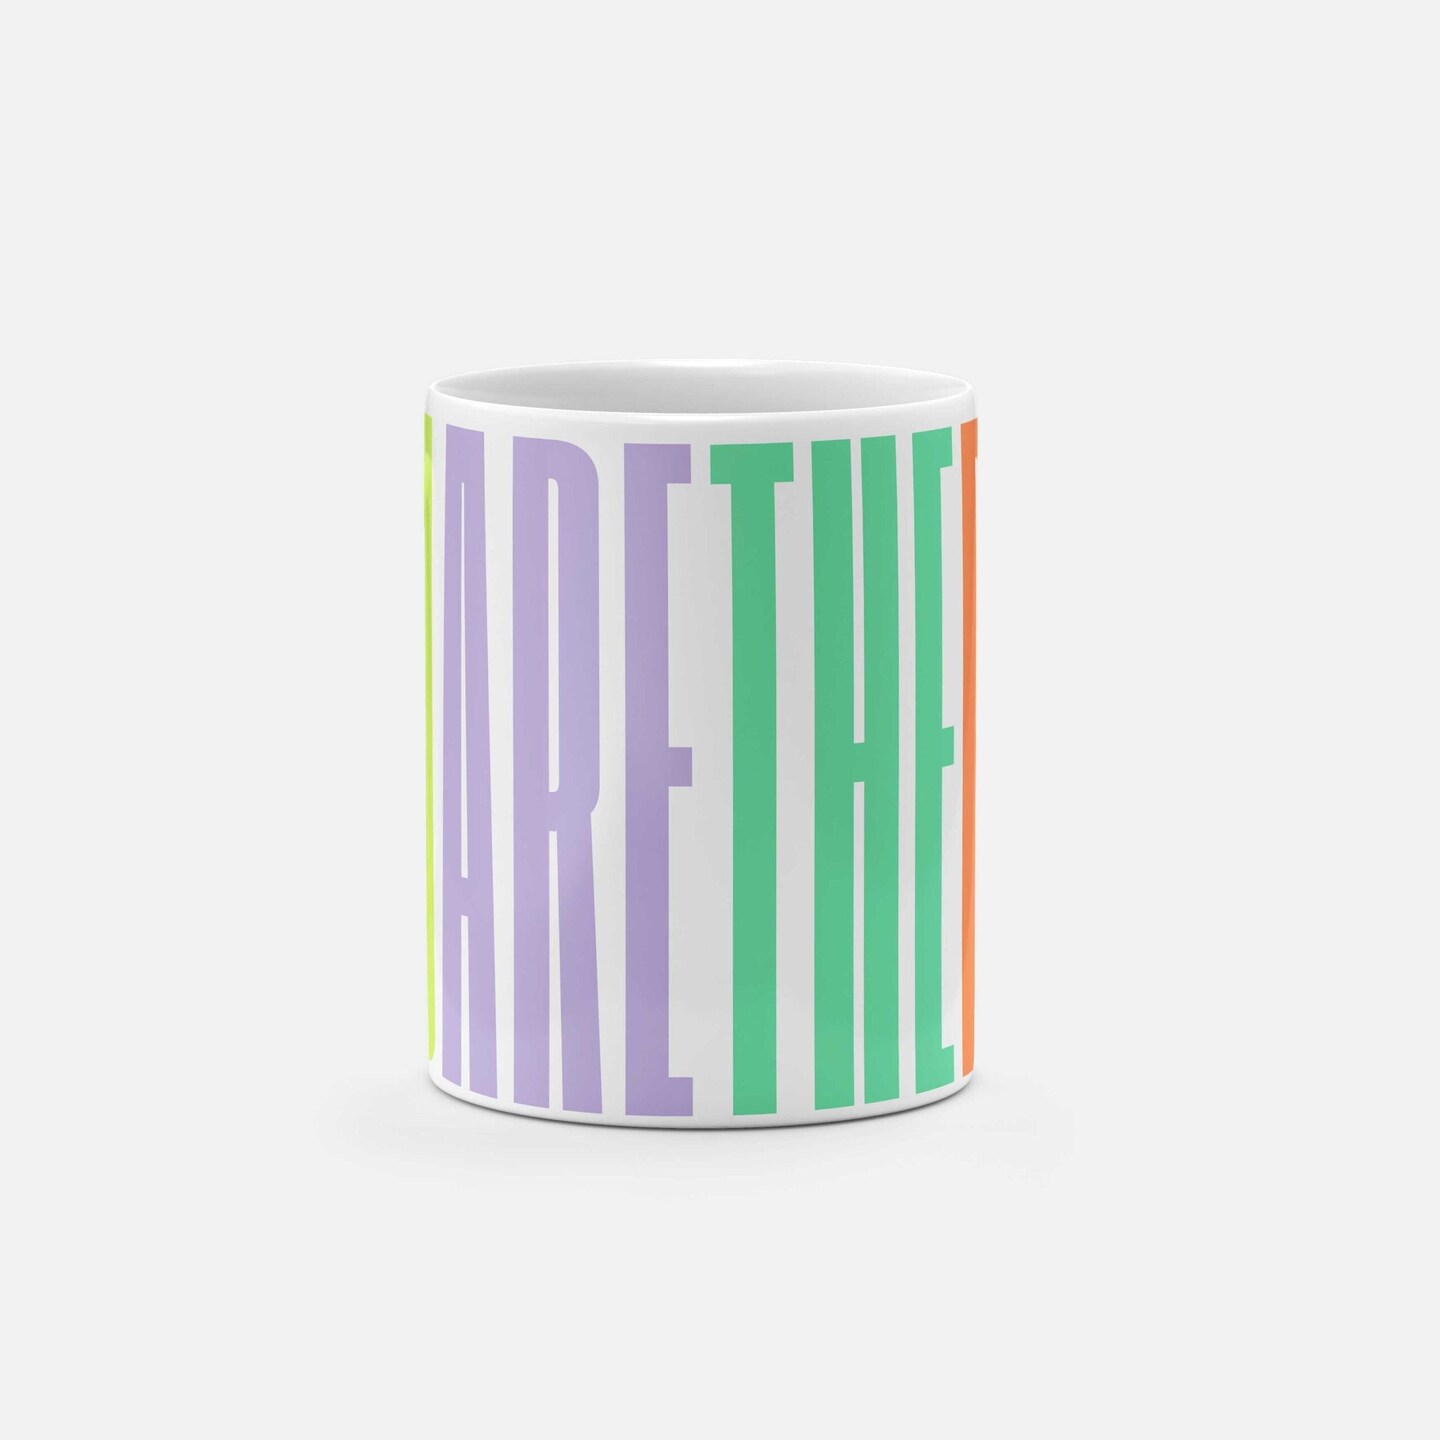 You Are the Best 11 Oz Mug